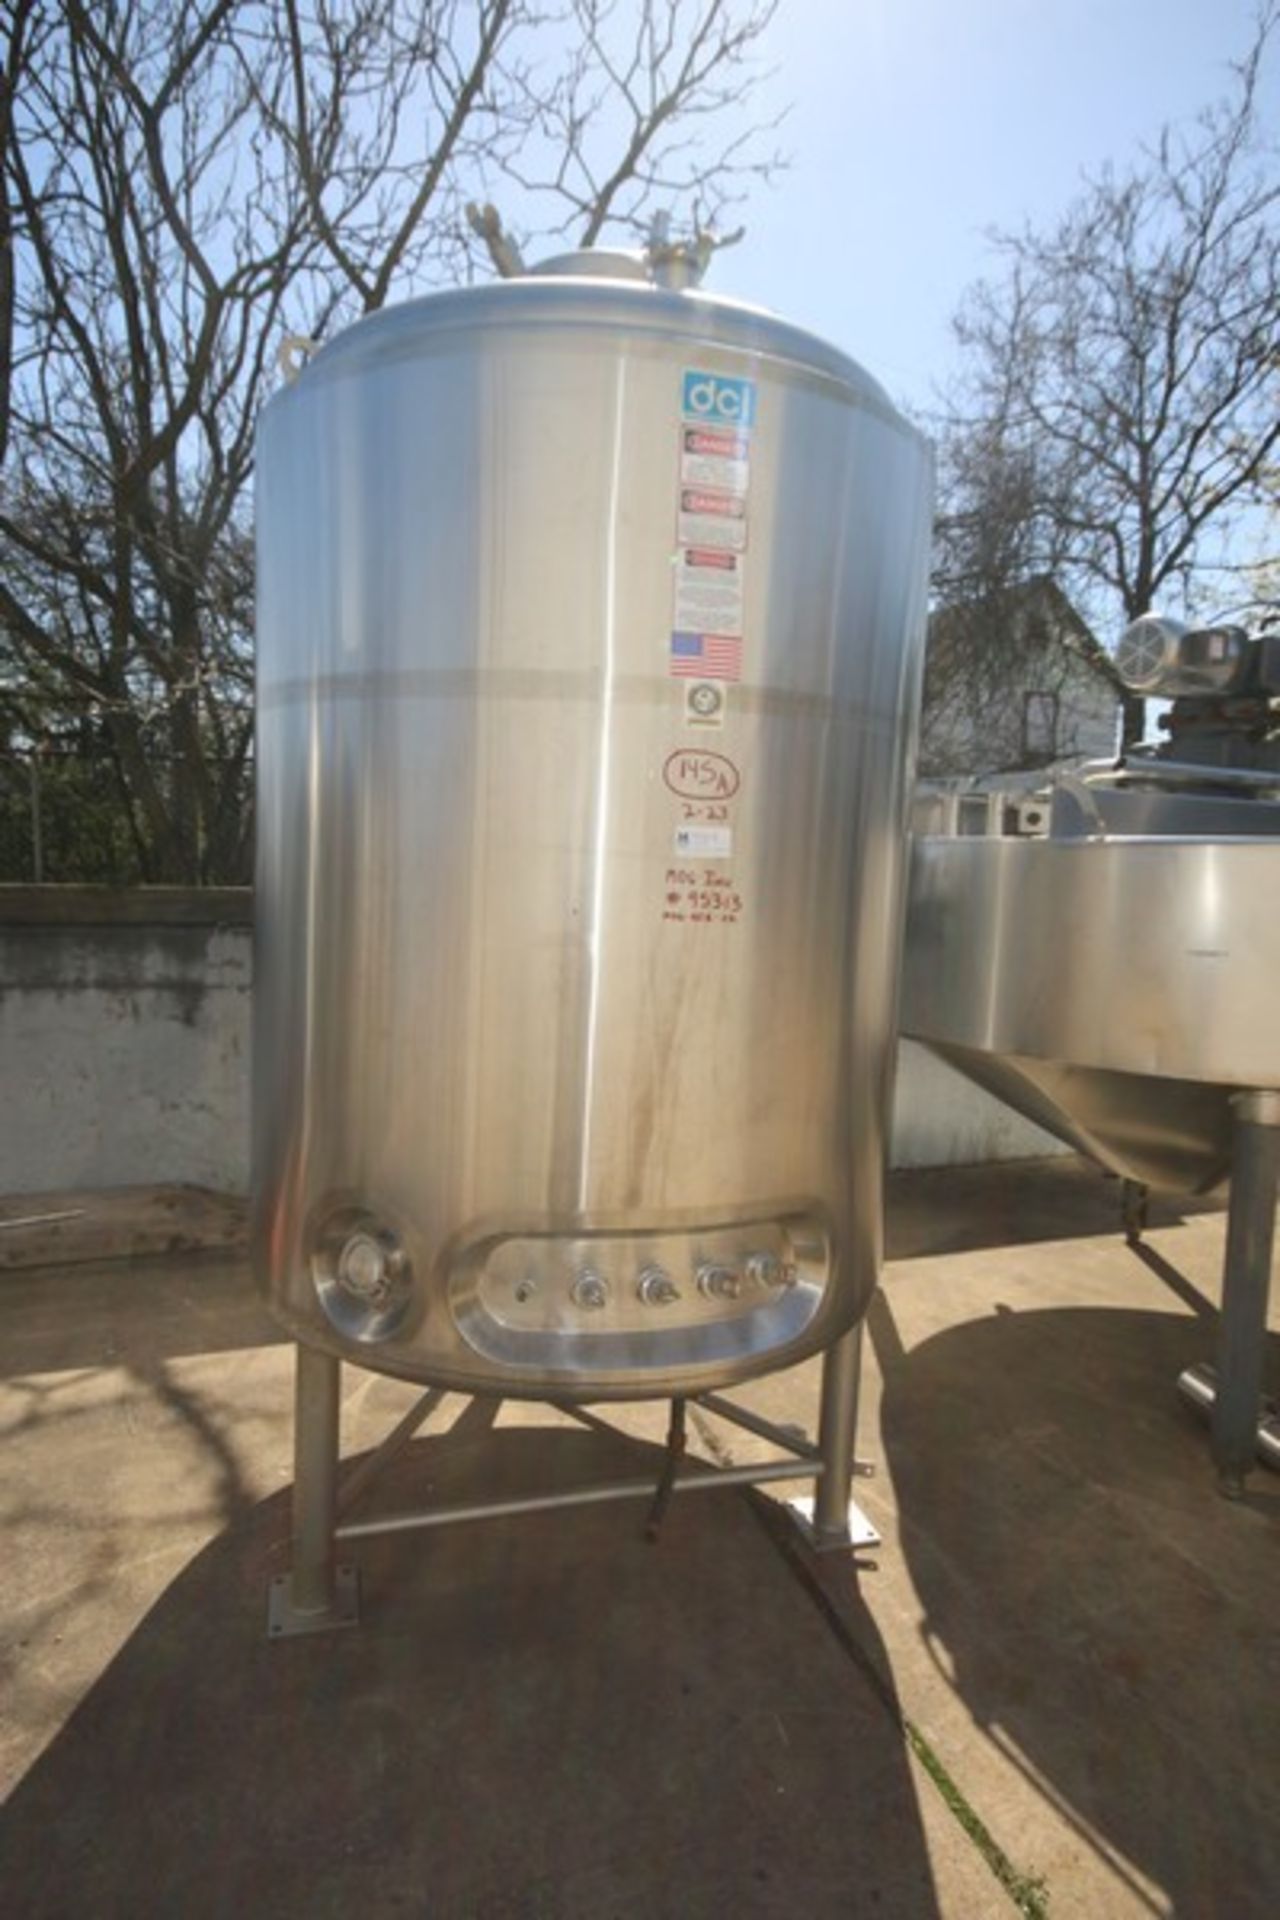 DCI Aprox. 660 (2500 Liter) Reactor Body, S/S Tank with Dished Heads, SN JS2295, Internal Rated 60